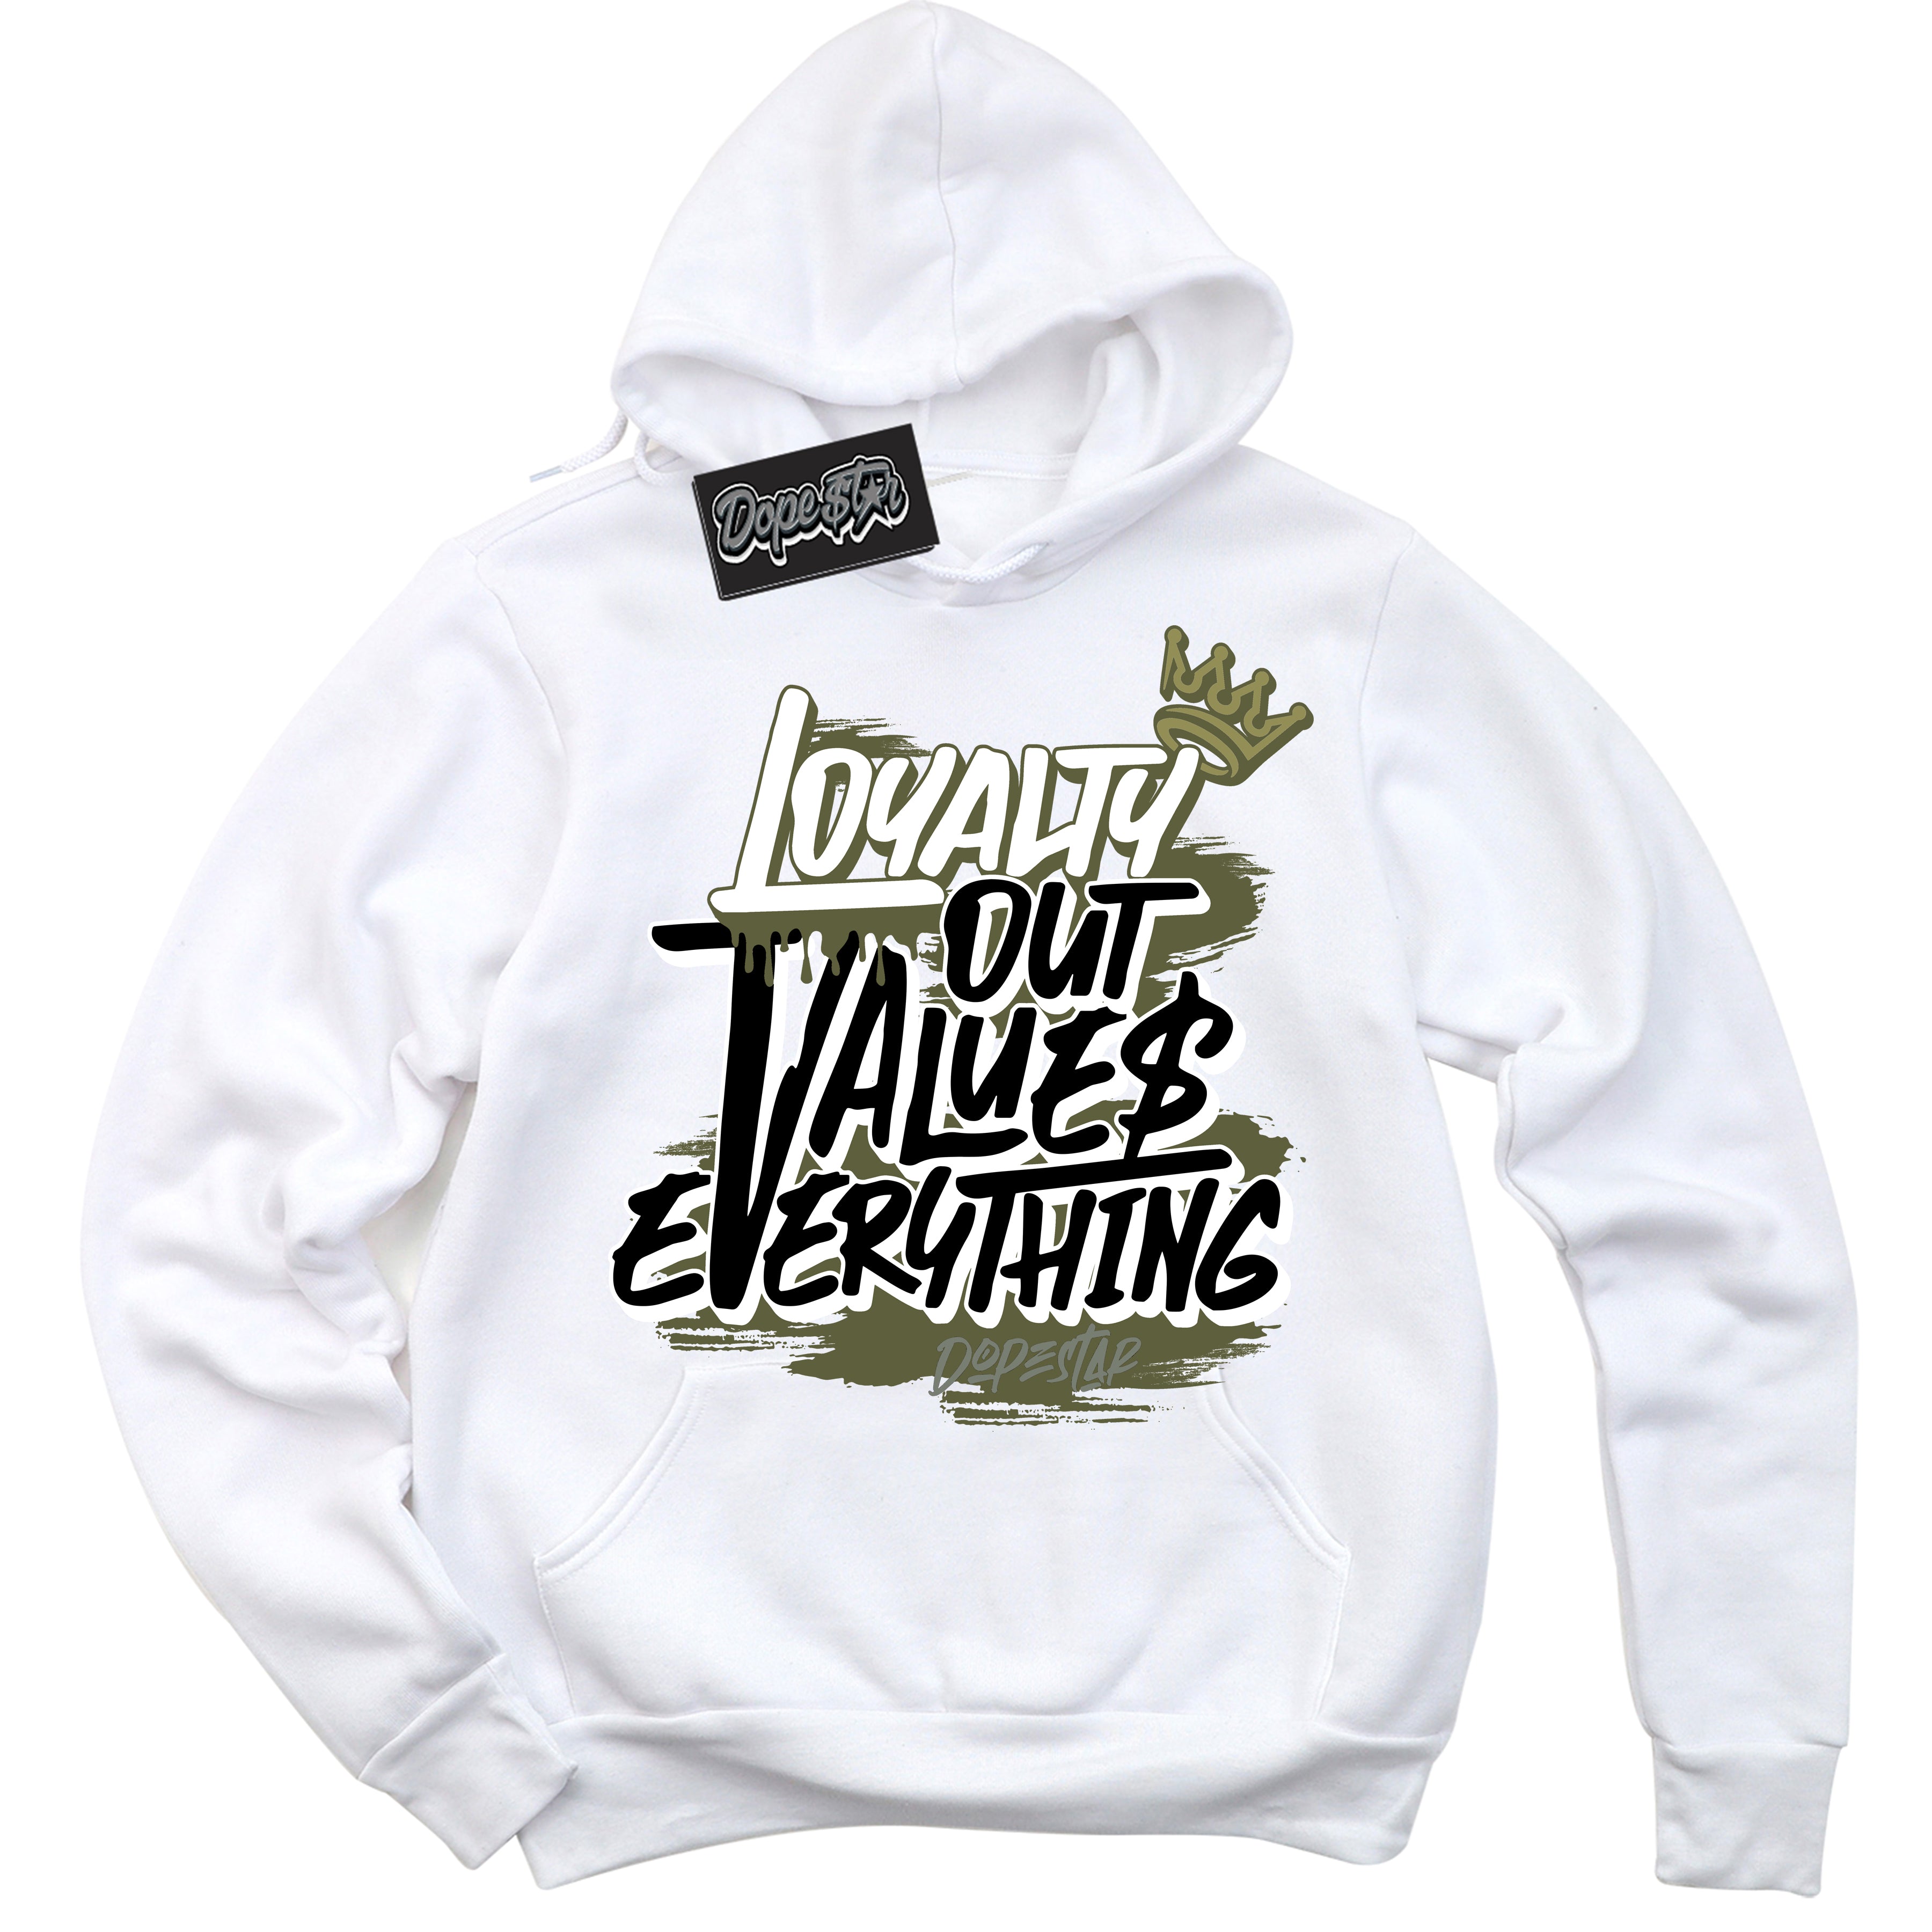 Cool White Hoodie with “ Loyalty Out Values Everything ”  design that Perfectly Matches Craft Olive 4s Sneakers.